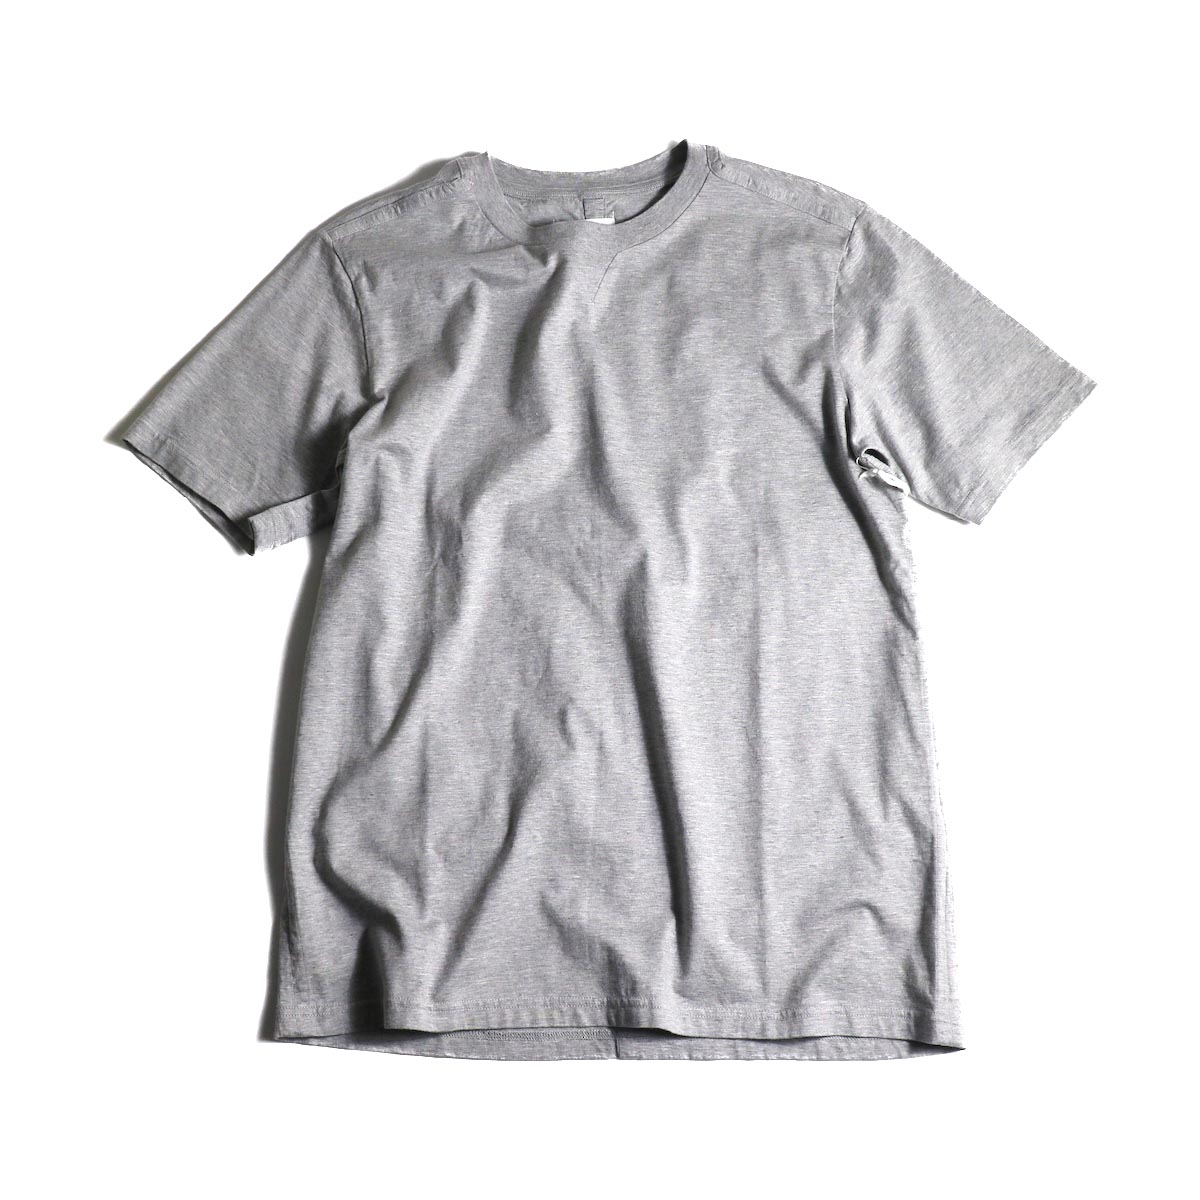 The Soloist / swc.0007a crew neck s/s tee (Gray)正面